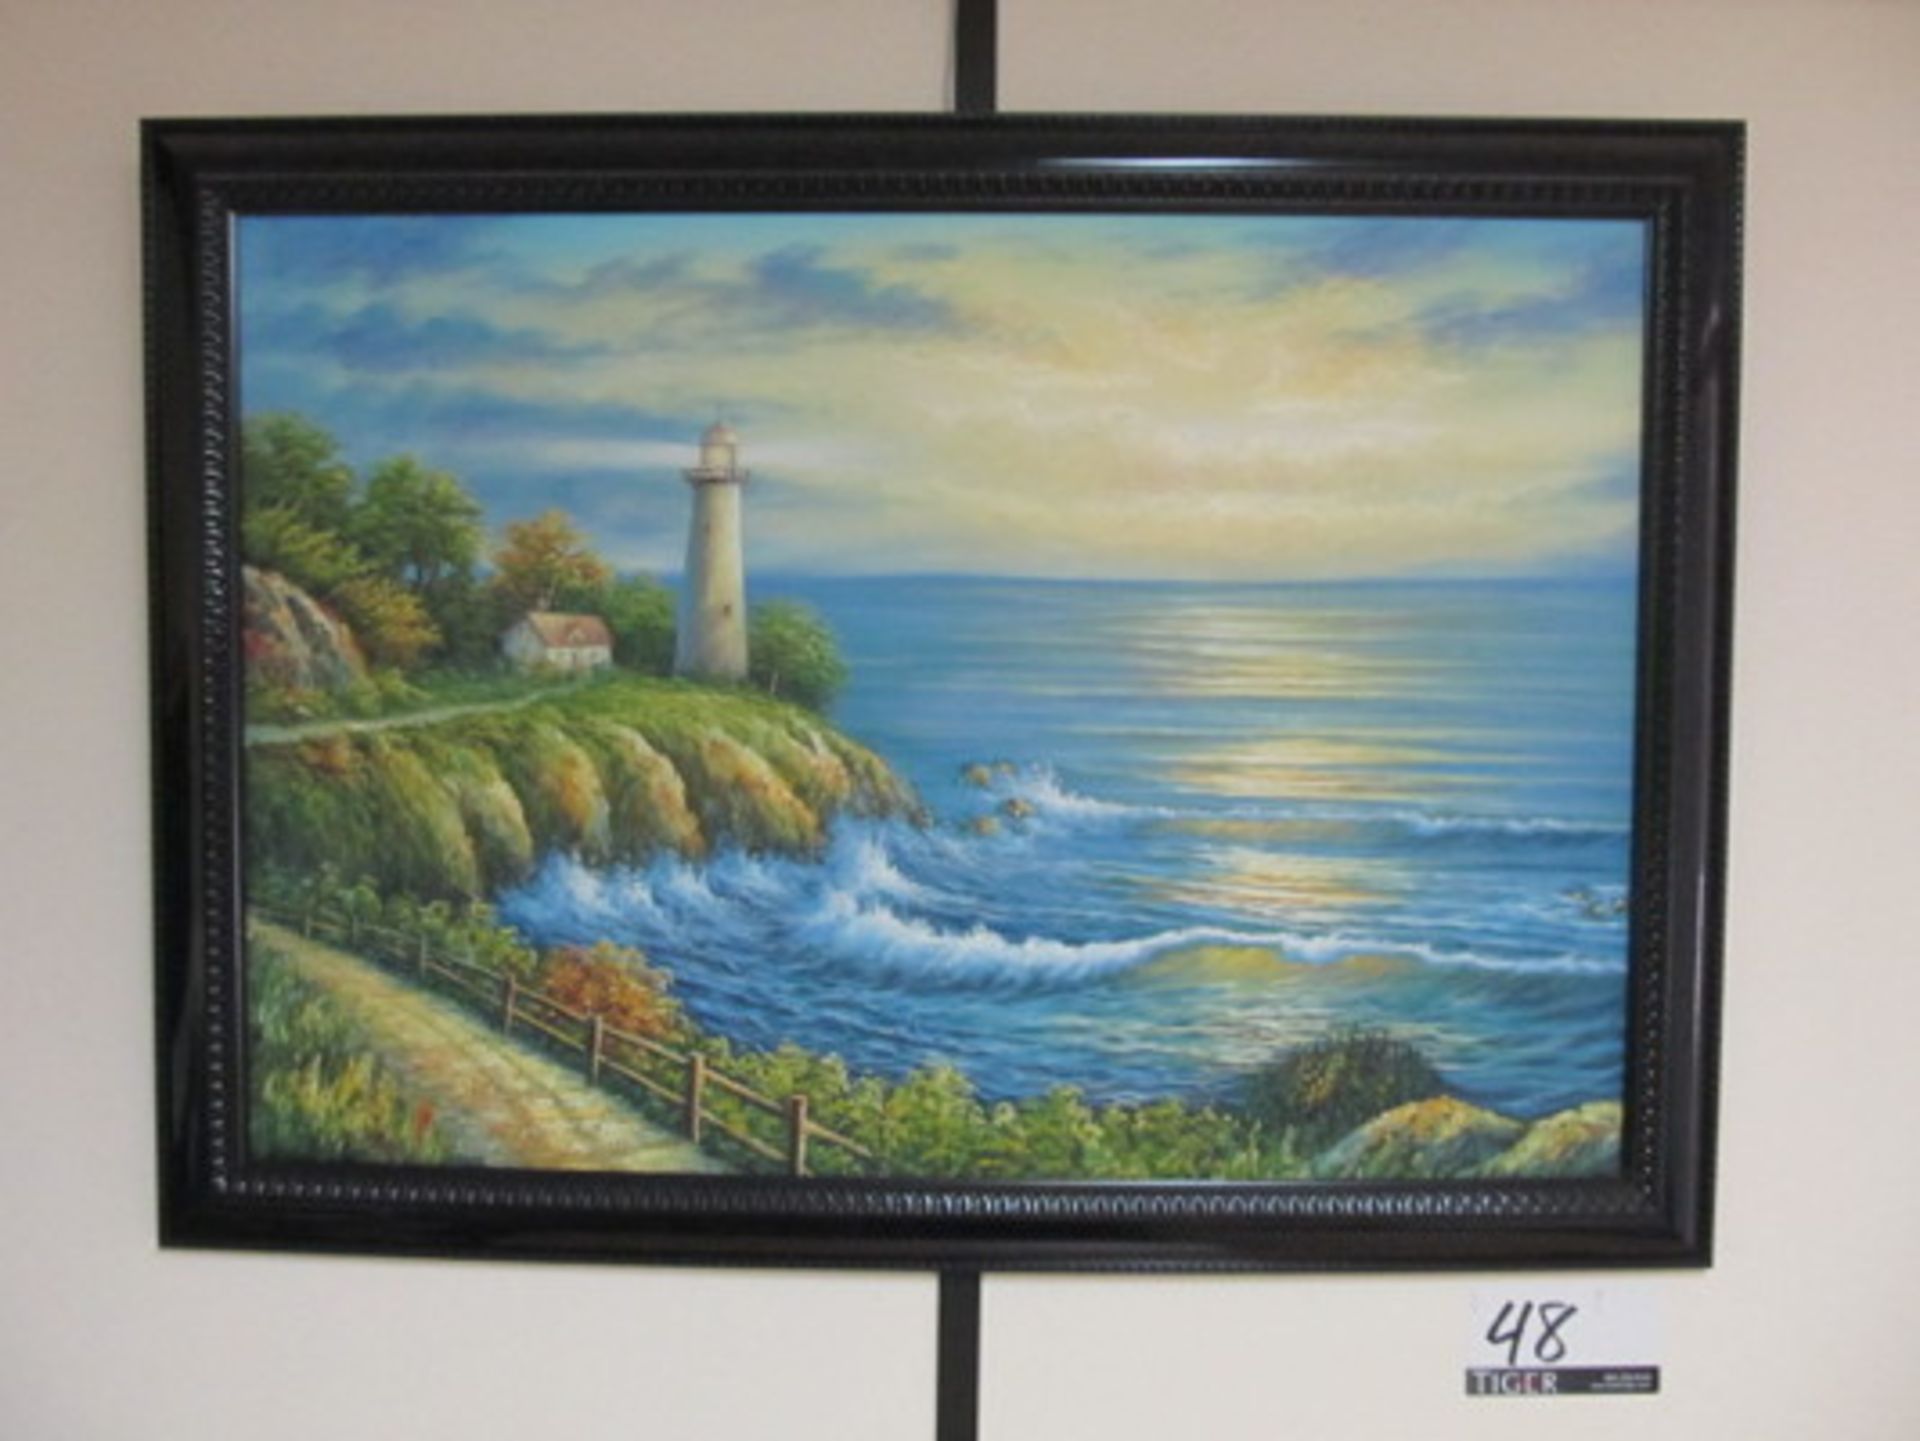 Framed Seaside Ocean Light House Painting, Approx. 40in x 29in - Asset Location: Sun Valley, CA